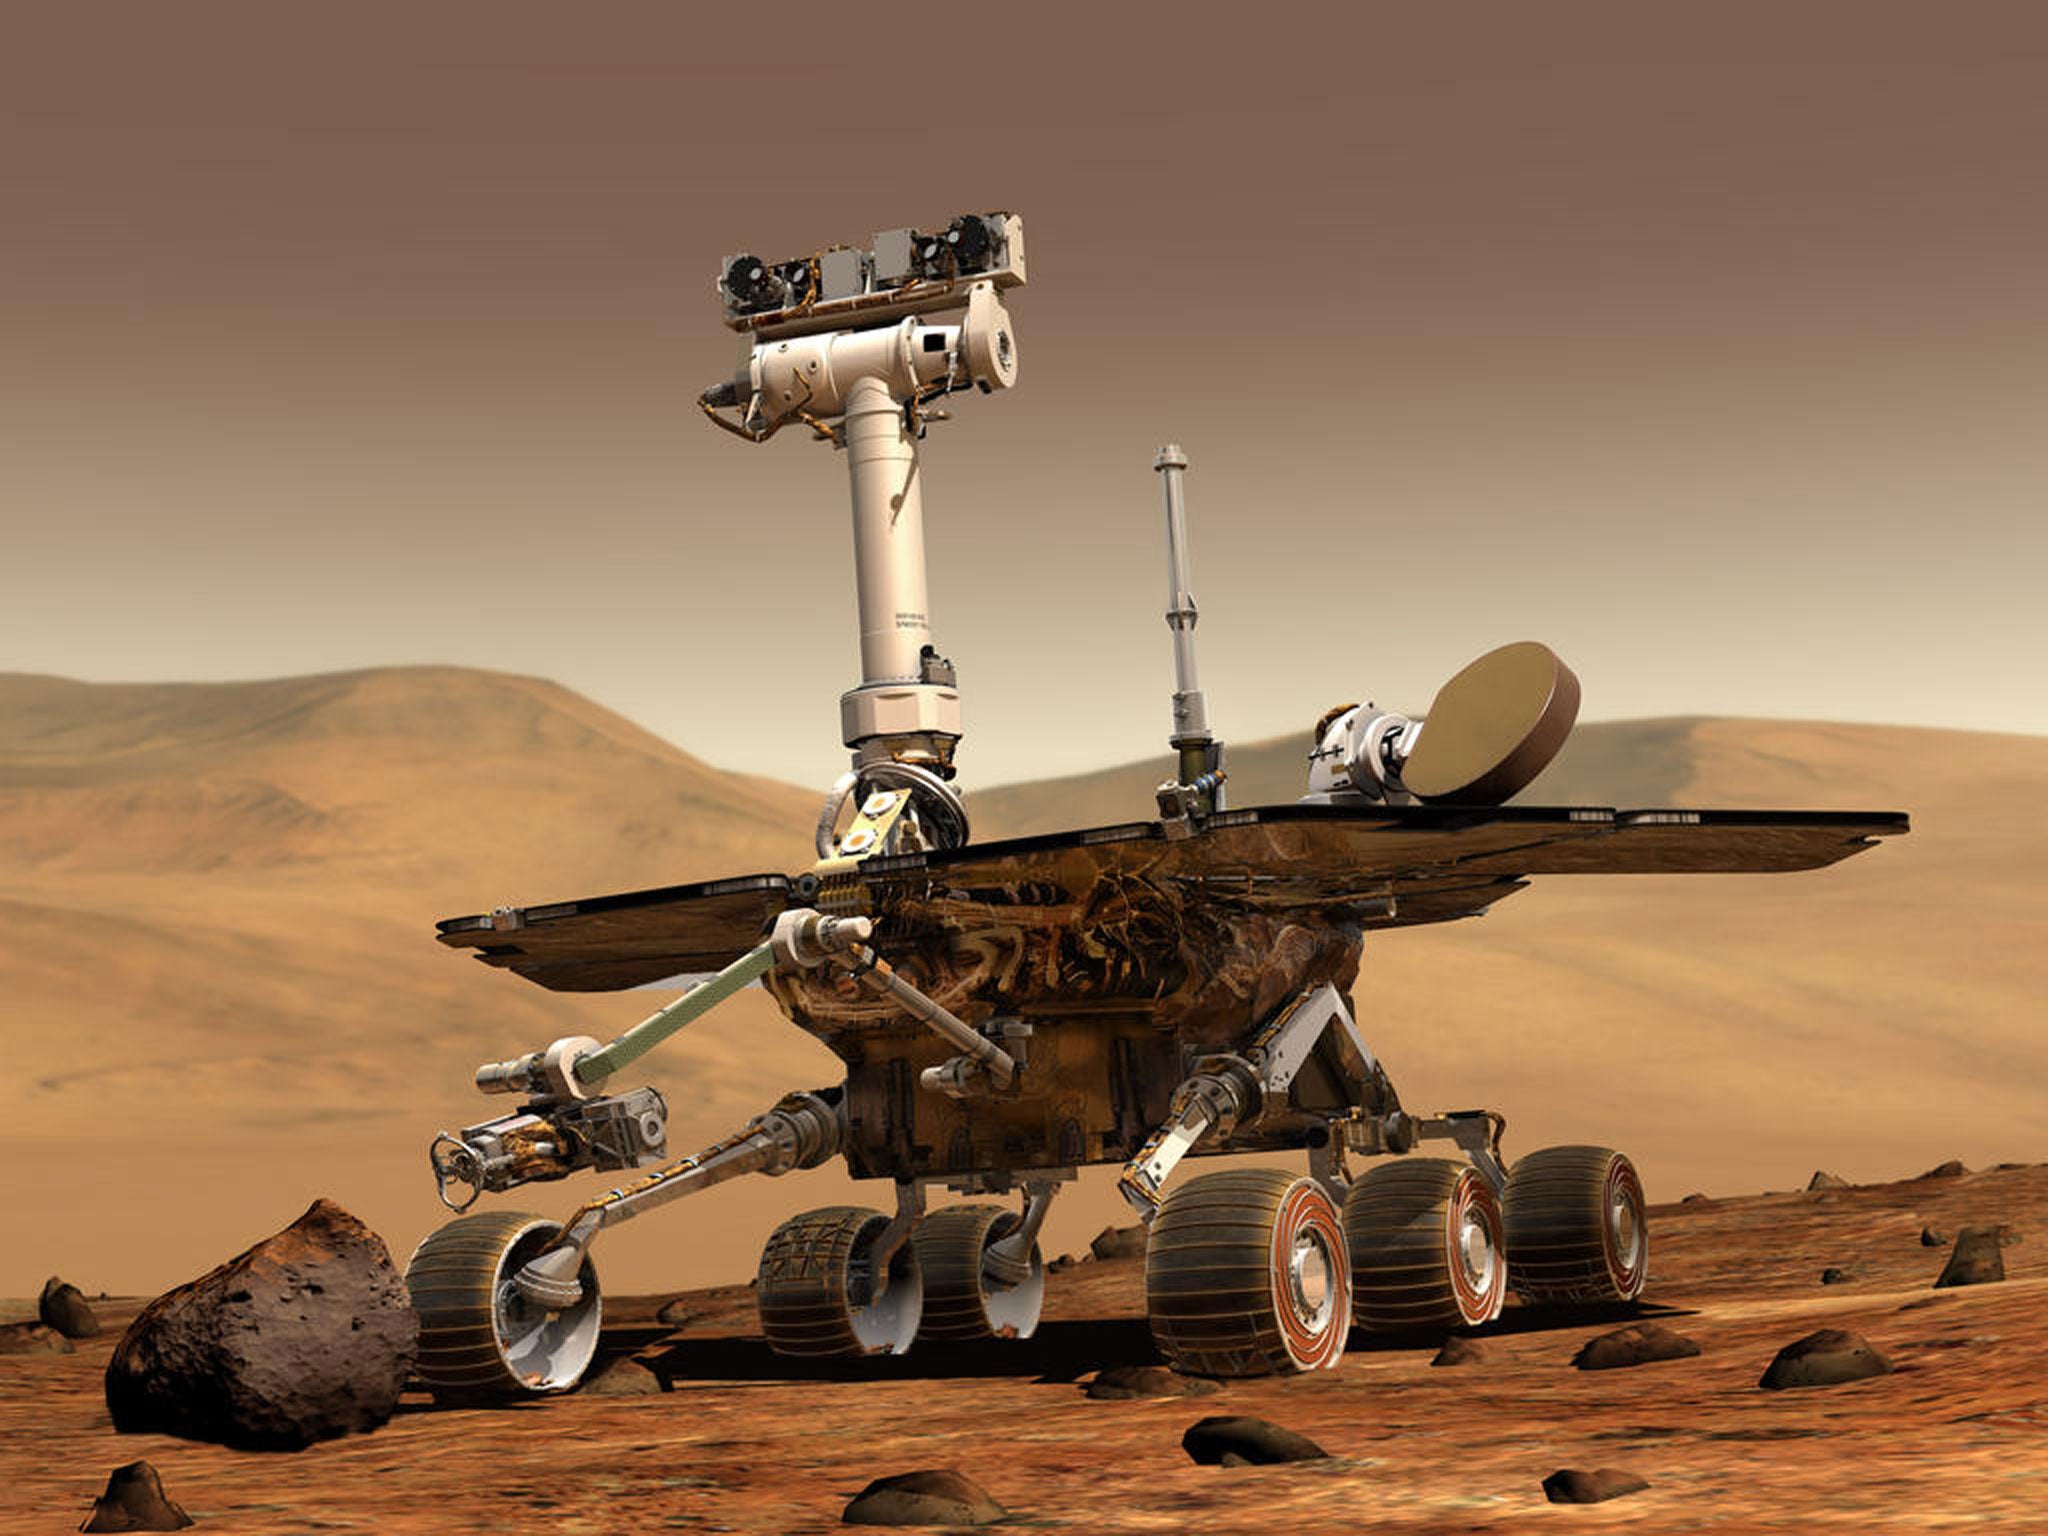 An artist's impression of the Nasa Opportunity rover on the surface of Mars